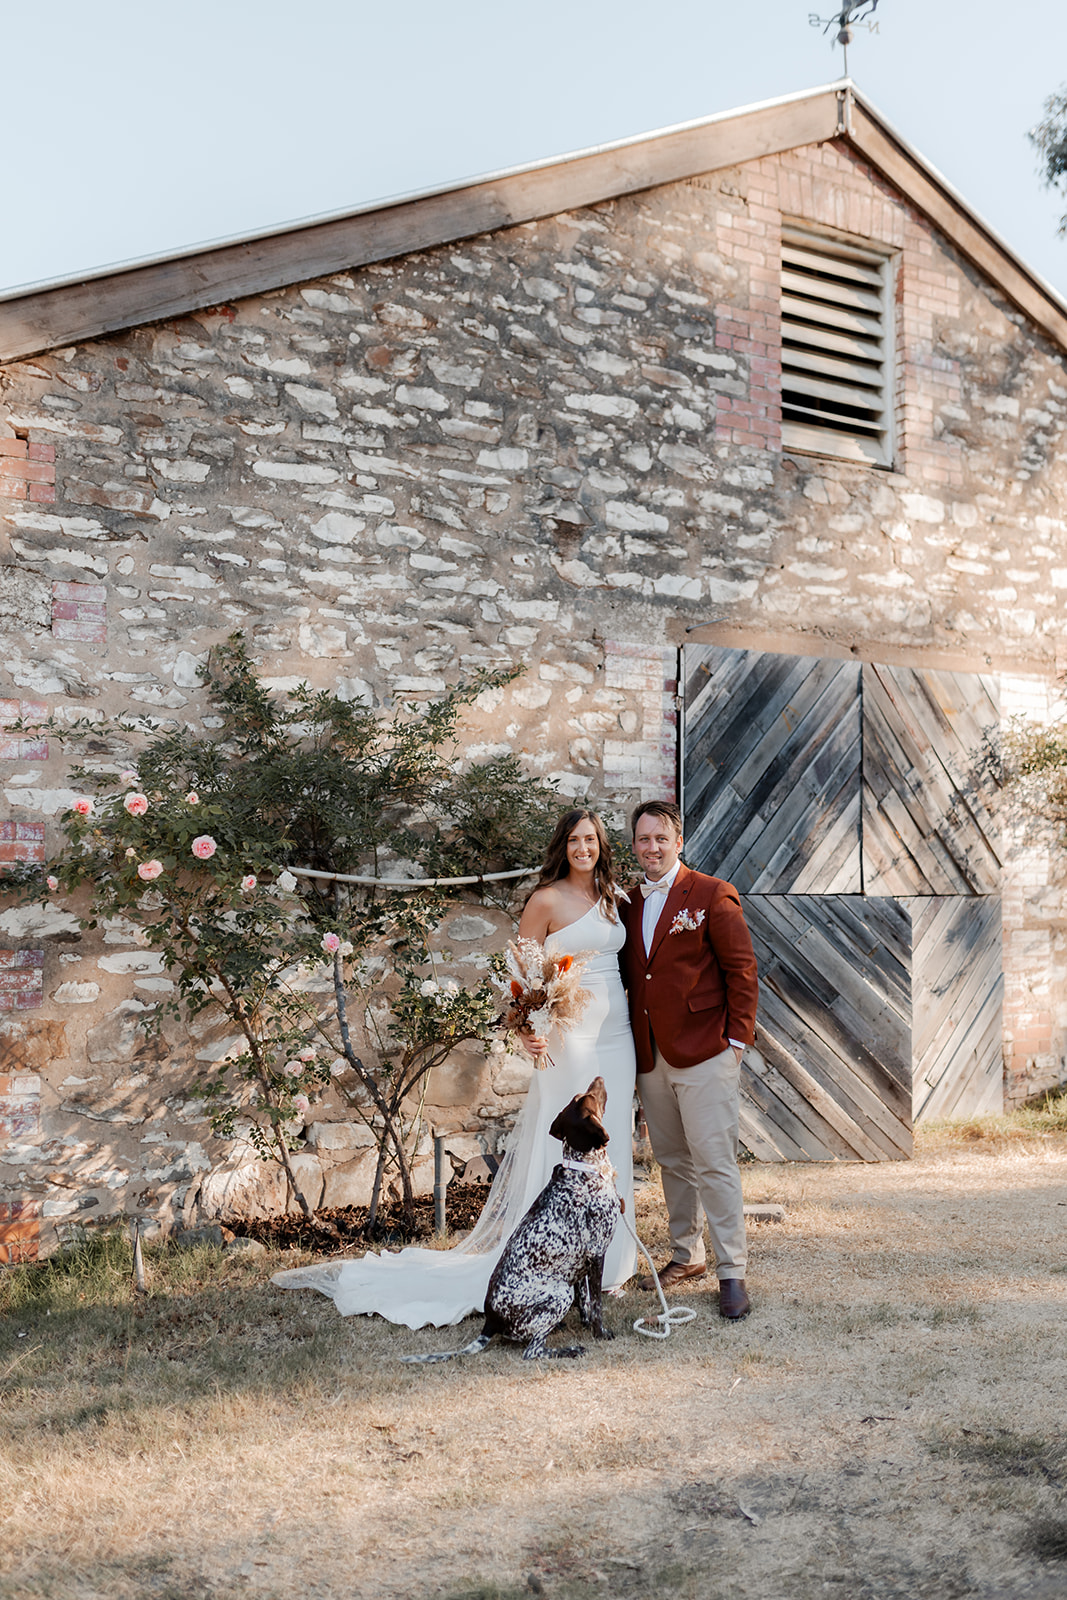 A unique and captivating Adelaide Hills wedding venue nestled on the site of an old copper smelter, The Brae Dawesley is a flexible dry-hire property offering elopements through to large celebrations and onsite accommodation for the couple.